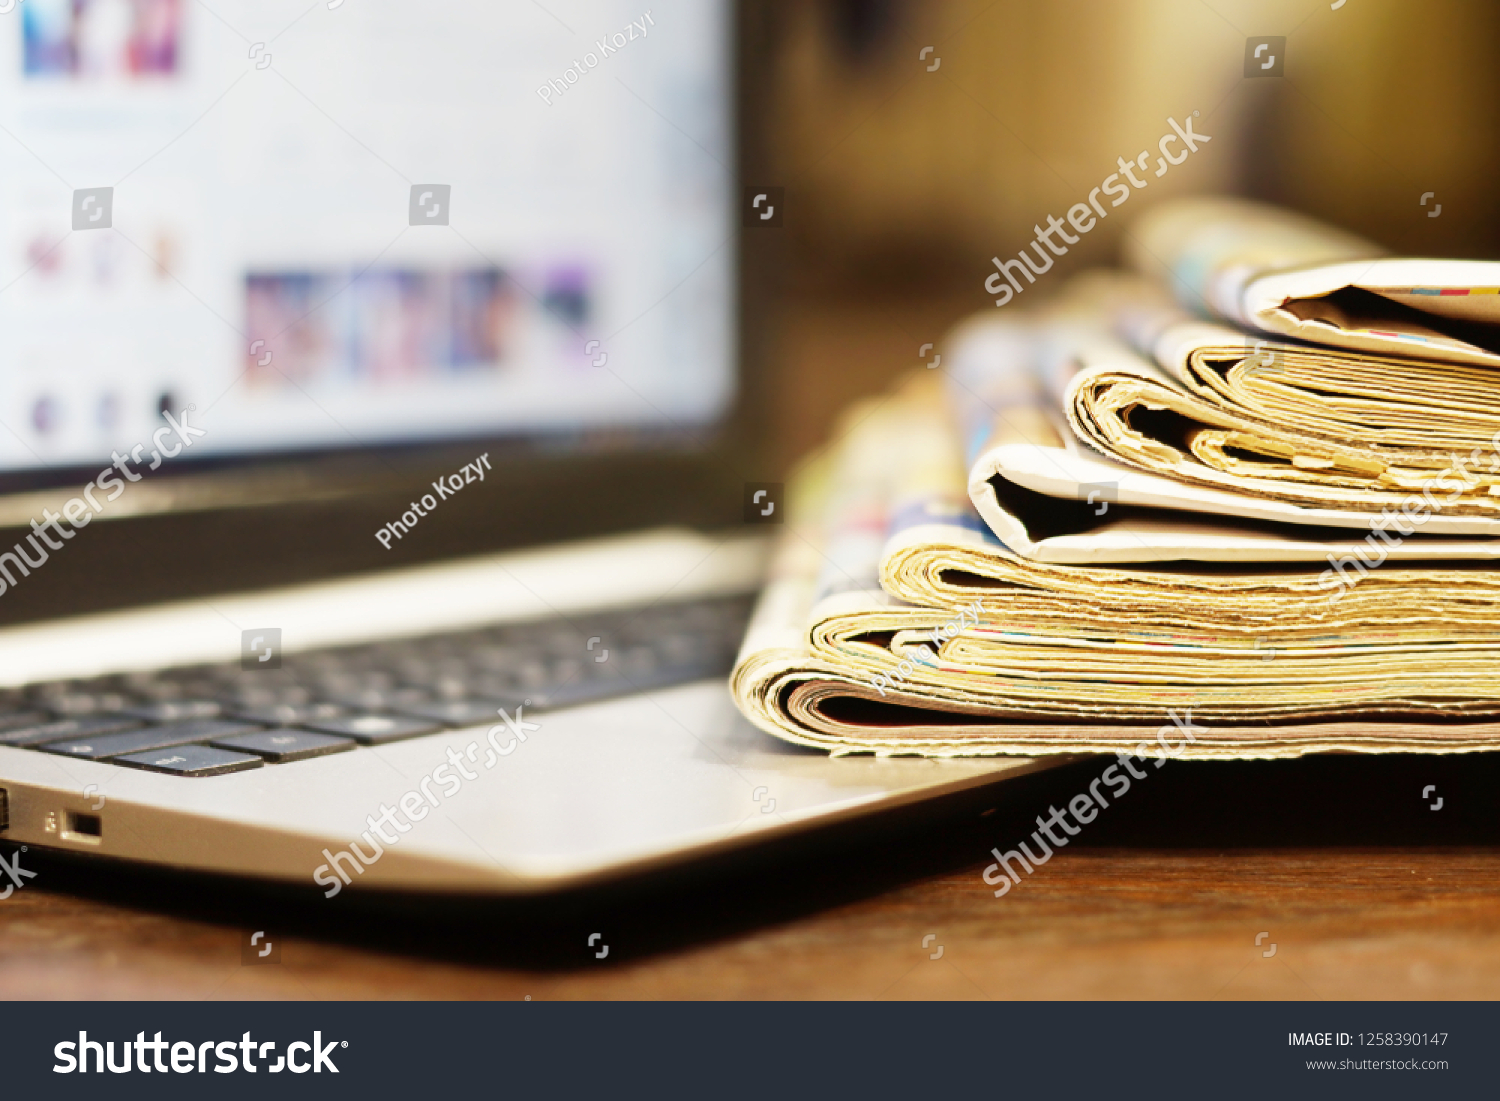 Newspapers and Laptop. Different Concepts for News - Social Network or Traditional Tabloid Journals. Data Sources - Electronic Screen of Computer or Paper Pages of Magazines, Internet or Papers #1258390147